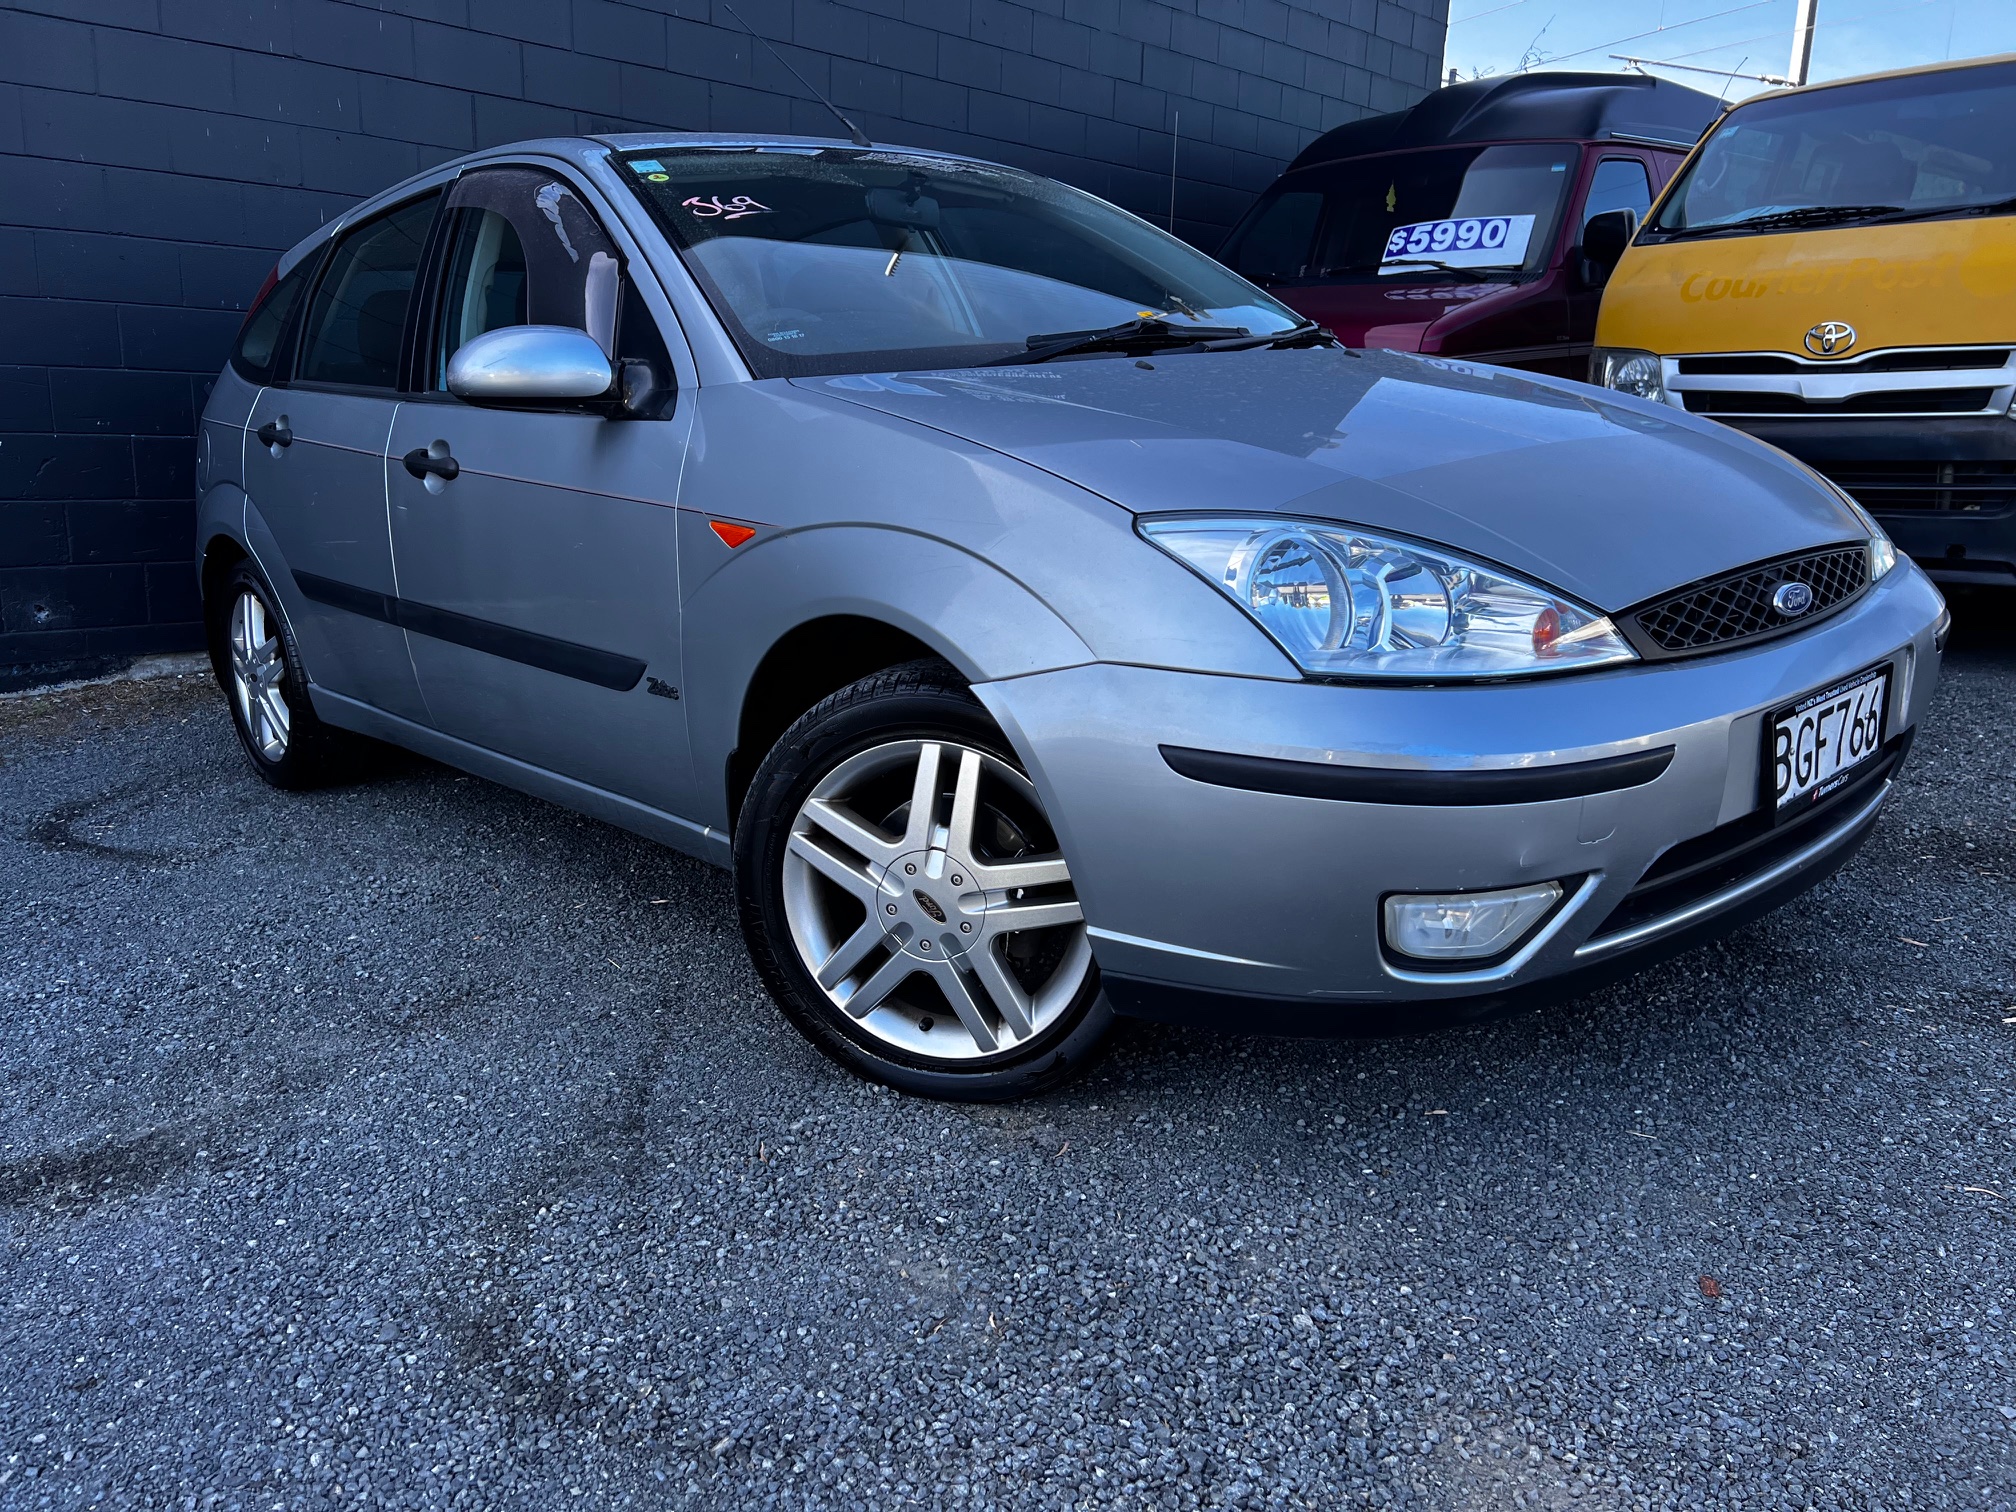 Ford Focus 2003 Image 2